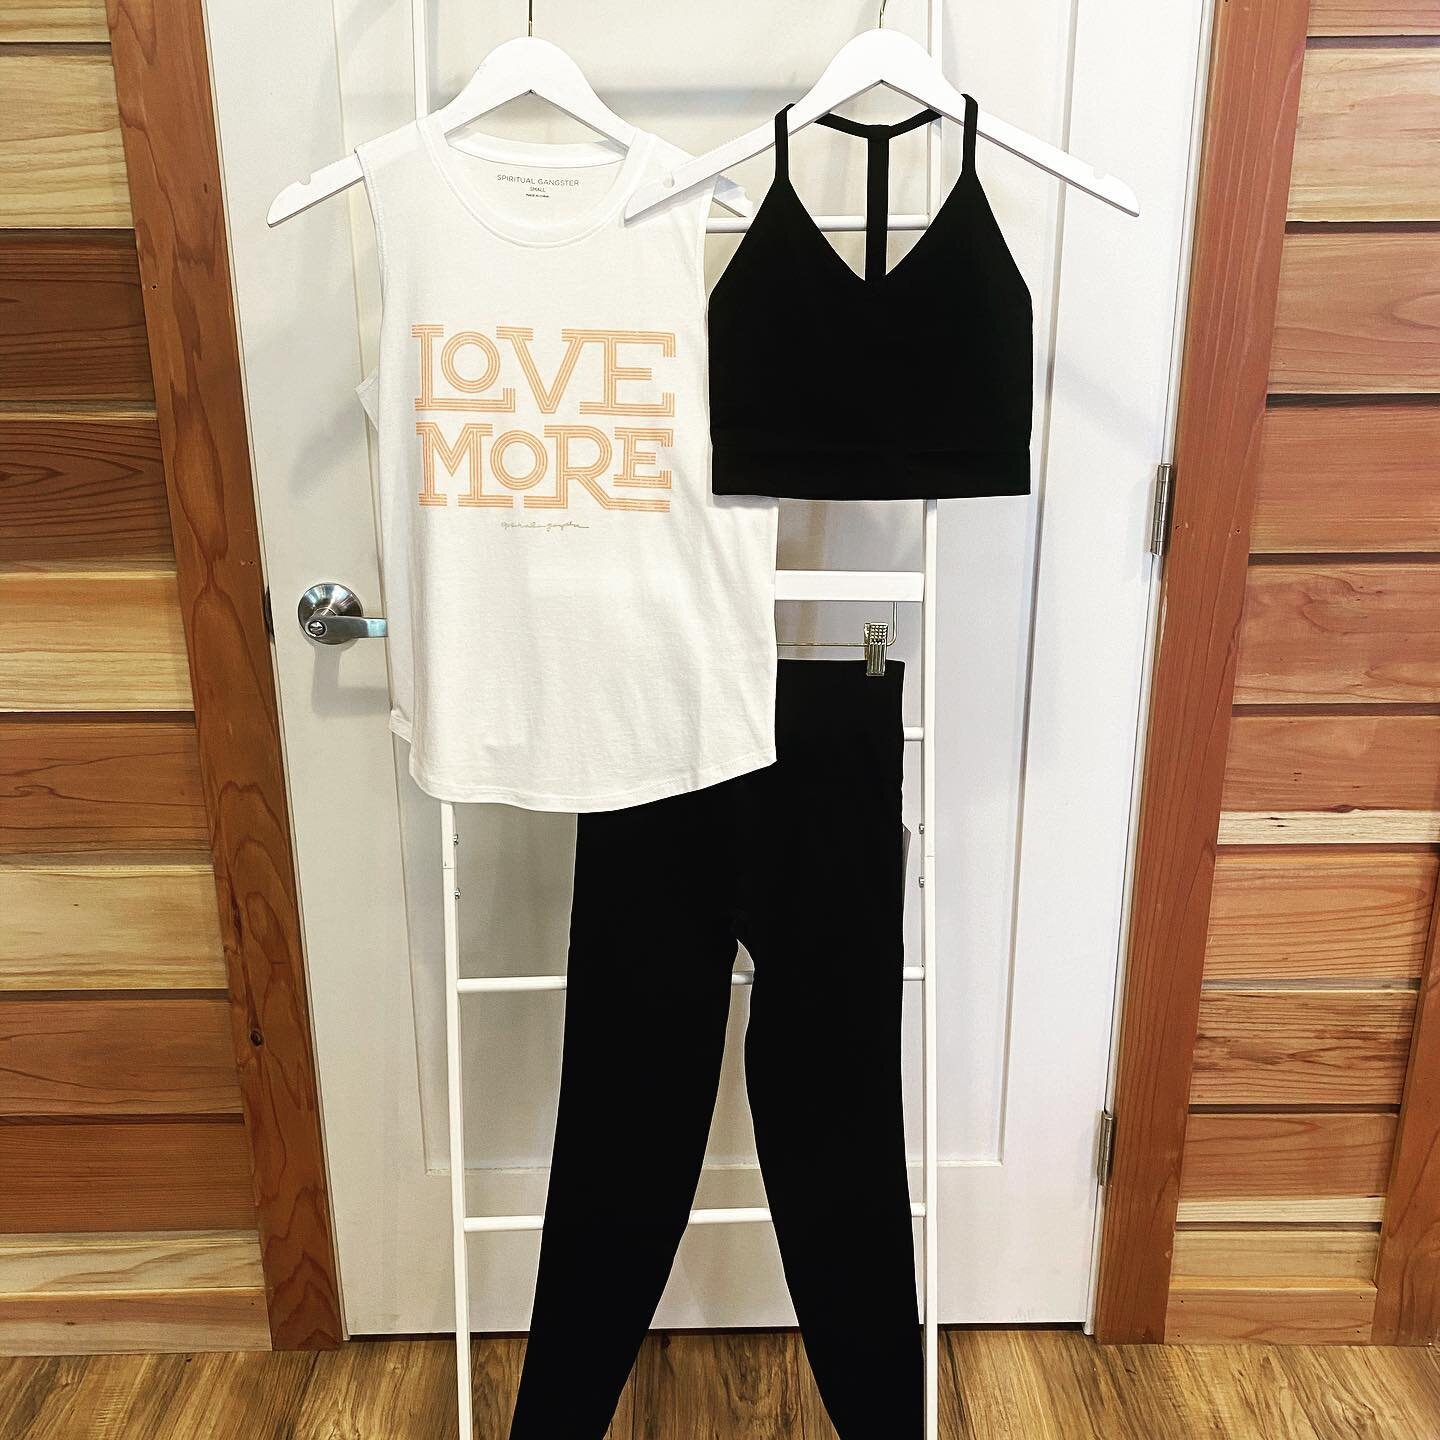 Who&rsquo;s ready to &hearts;️ a little more? We&rsquo;re sitting here thinking it&rsquo;s time to love the gym a little more before bikini season ☀️ and what better way to love a work out than with new arrivals from @spiritualgangster
☺️
.
.
.
#nort